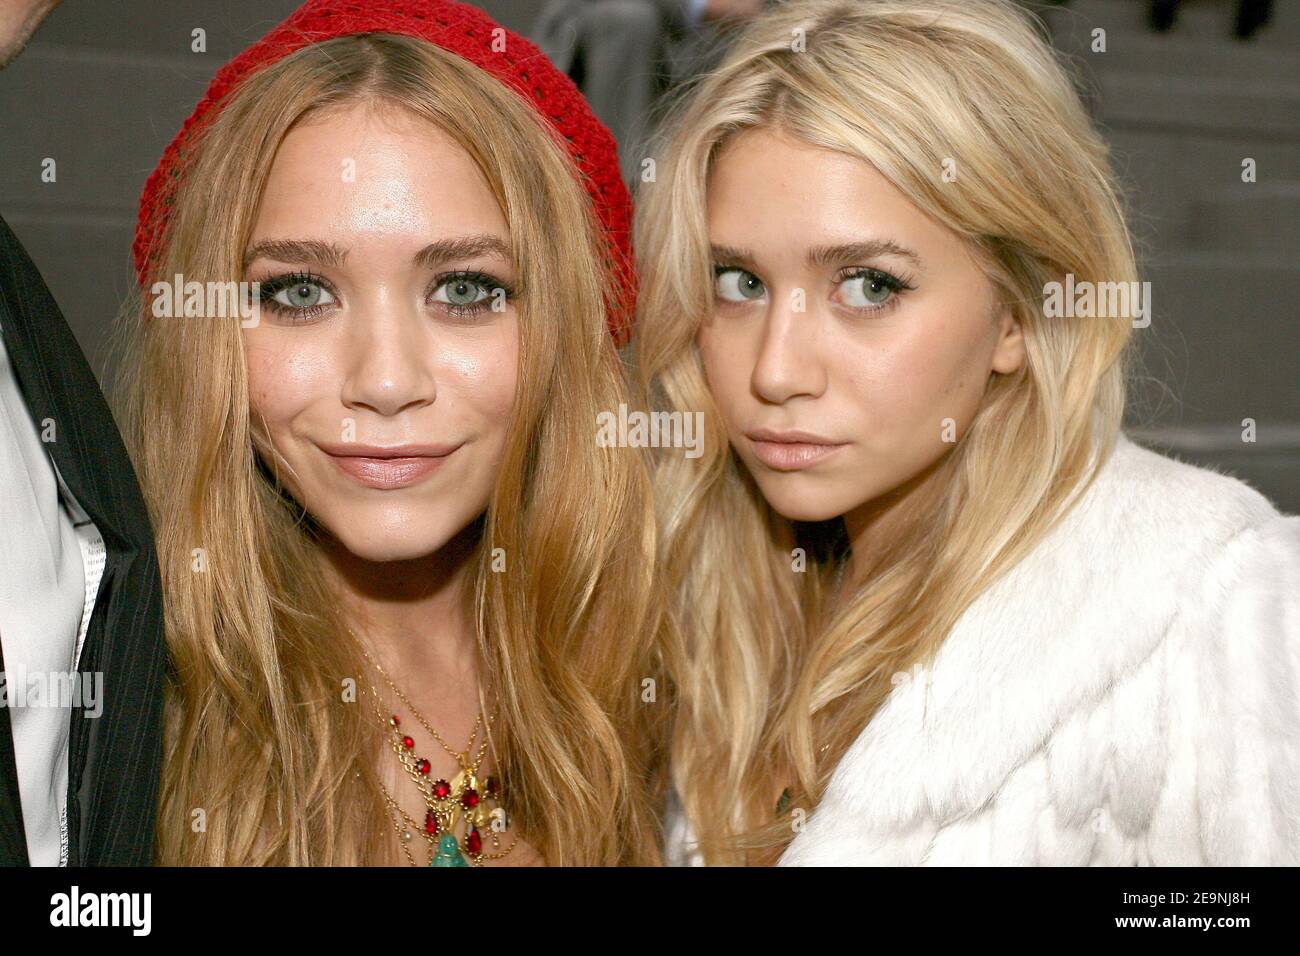 US actresses Mary-Kate (L) and Ashley Olsen sit front row at the presentation of the Christian Dior Spring-Summer 2007 Ready-to-Wear collection by British designer Galliano, in the Grand Palais in Paris,